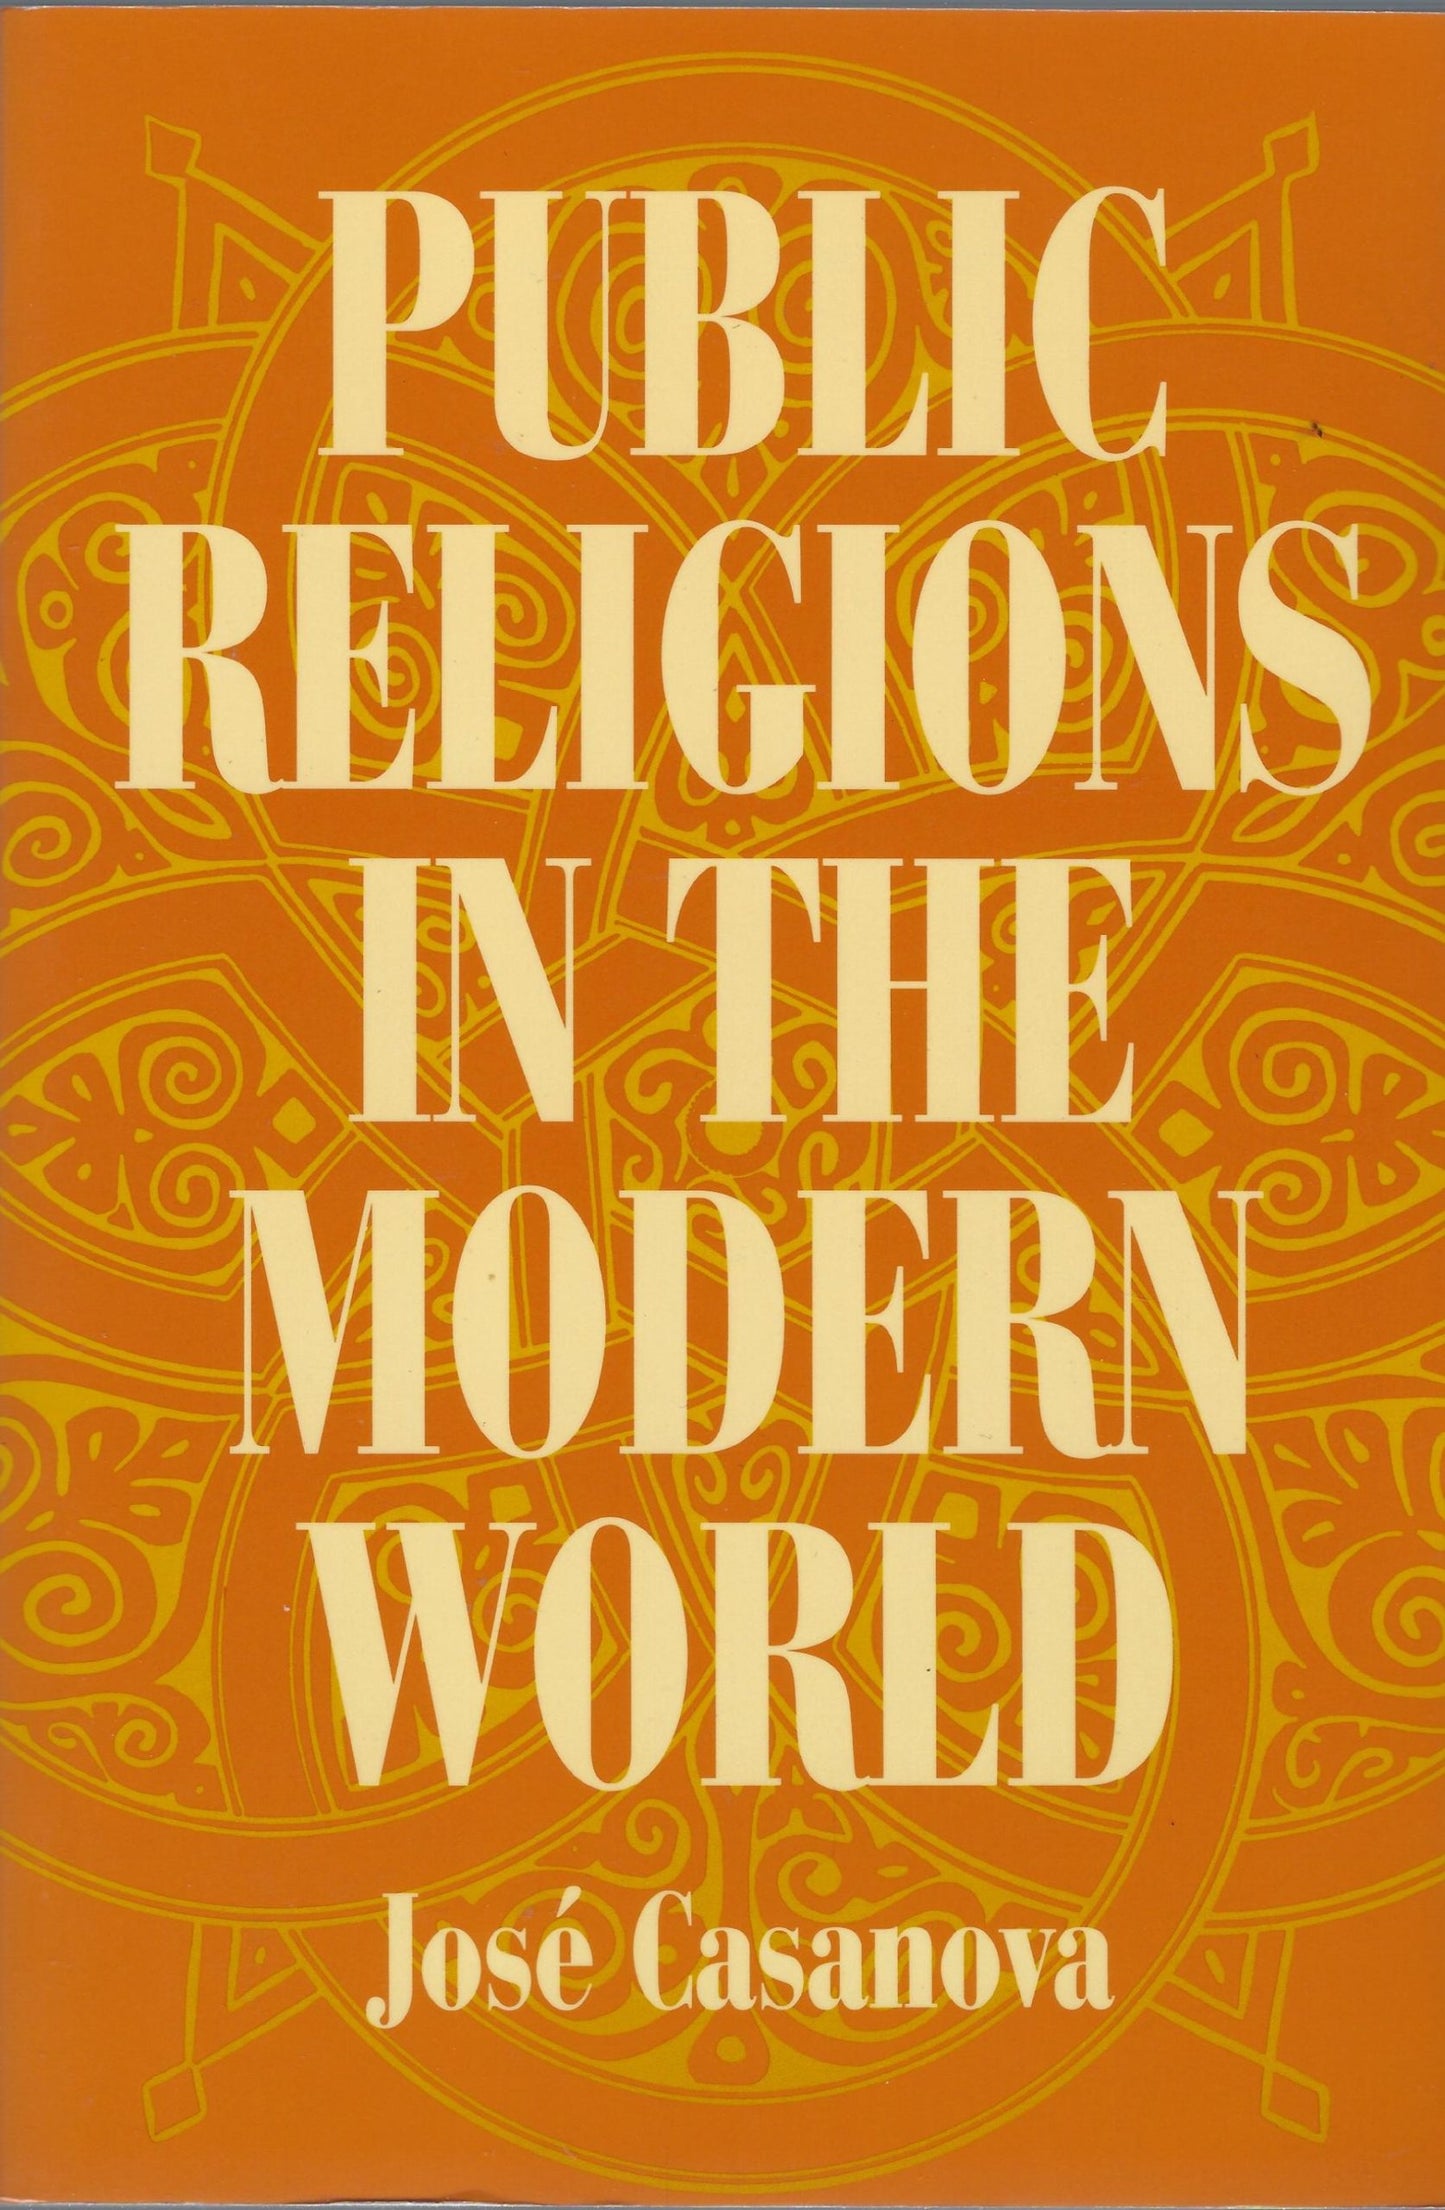 Public Religions in the Modern World